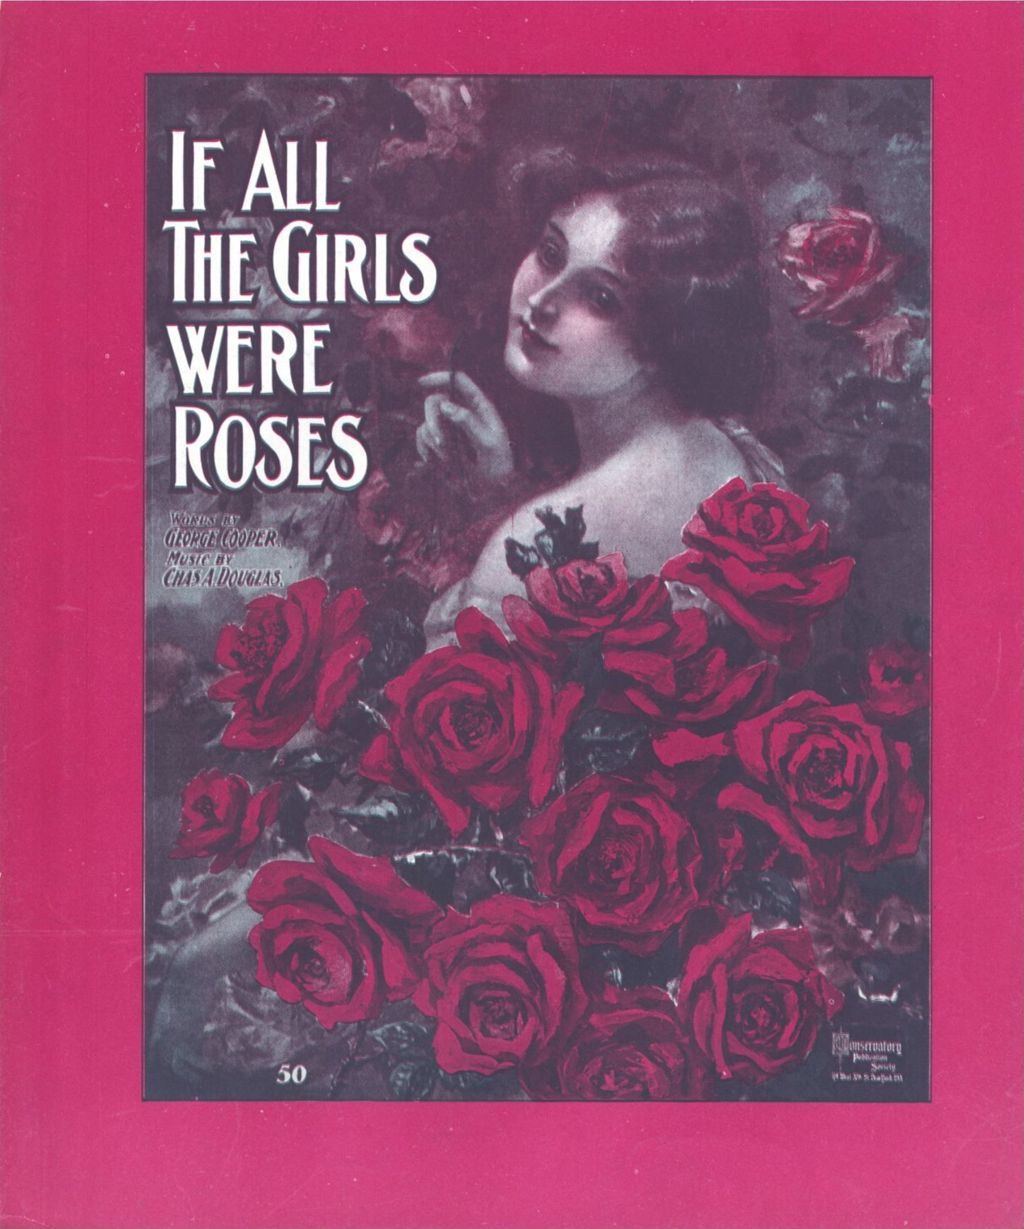 Miniature of If All the Girls Were Roses